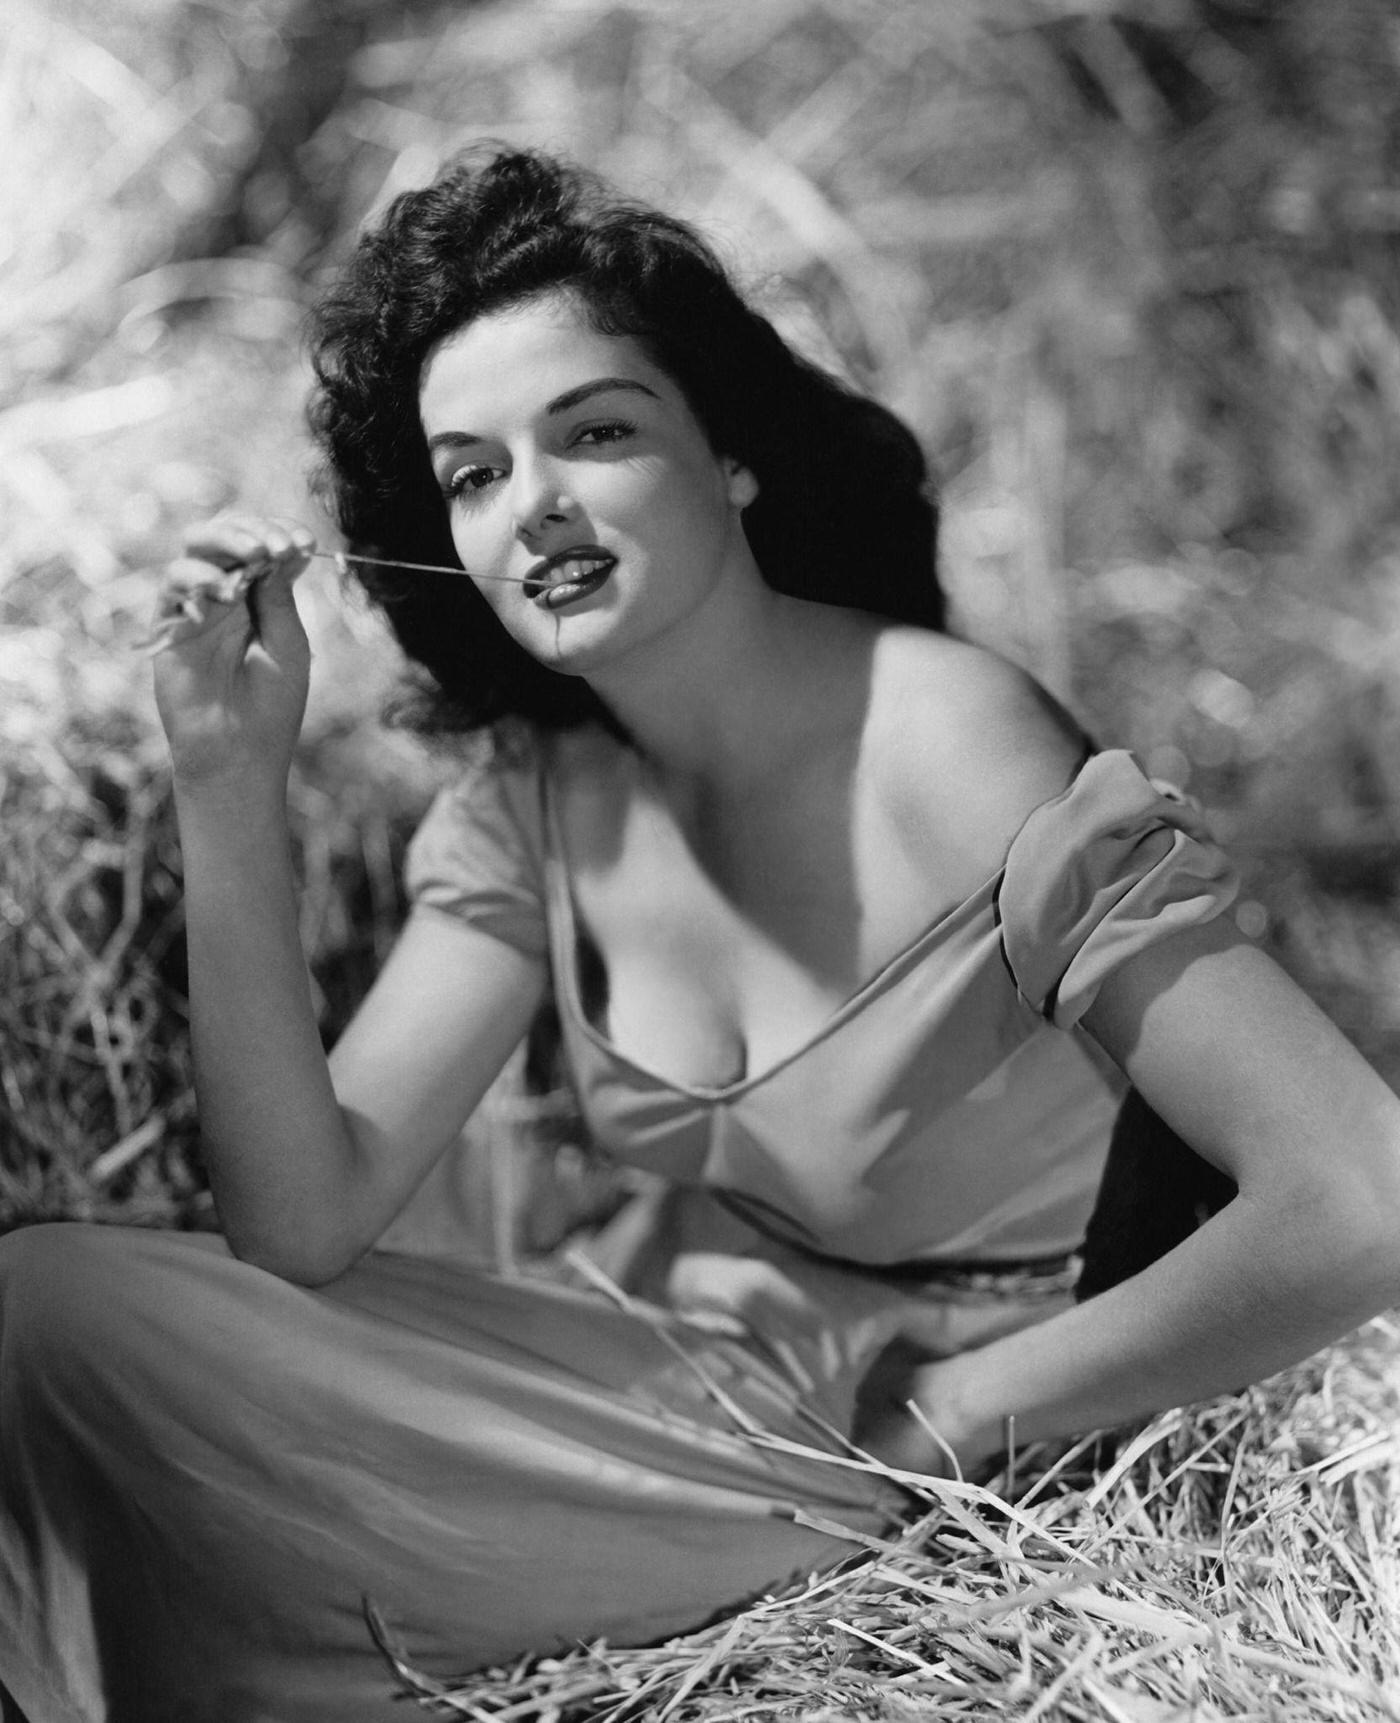 Jane Russell in a portrait session for the movie "The Outlaw", 1943